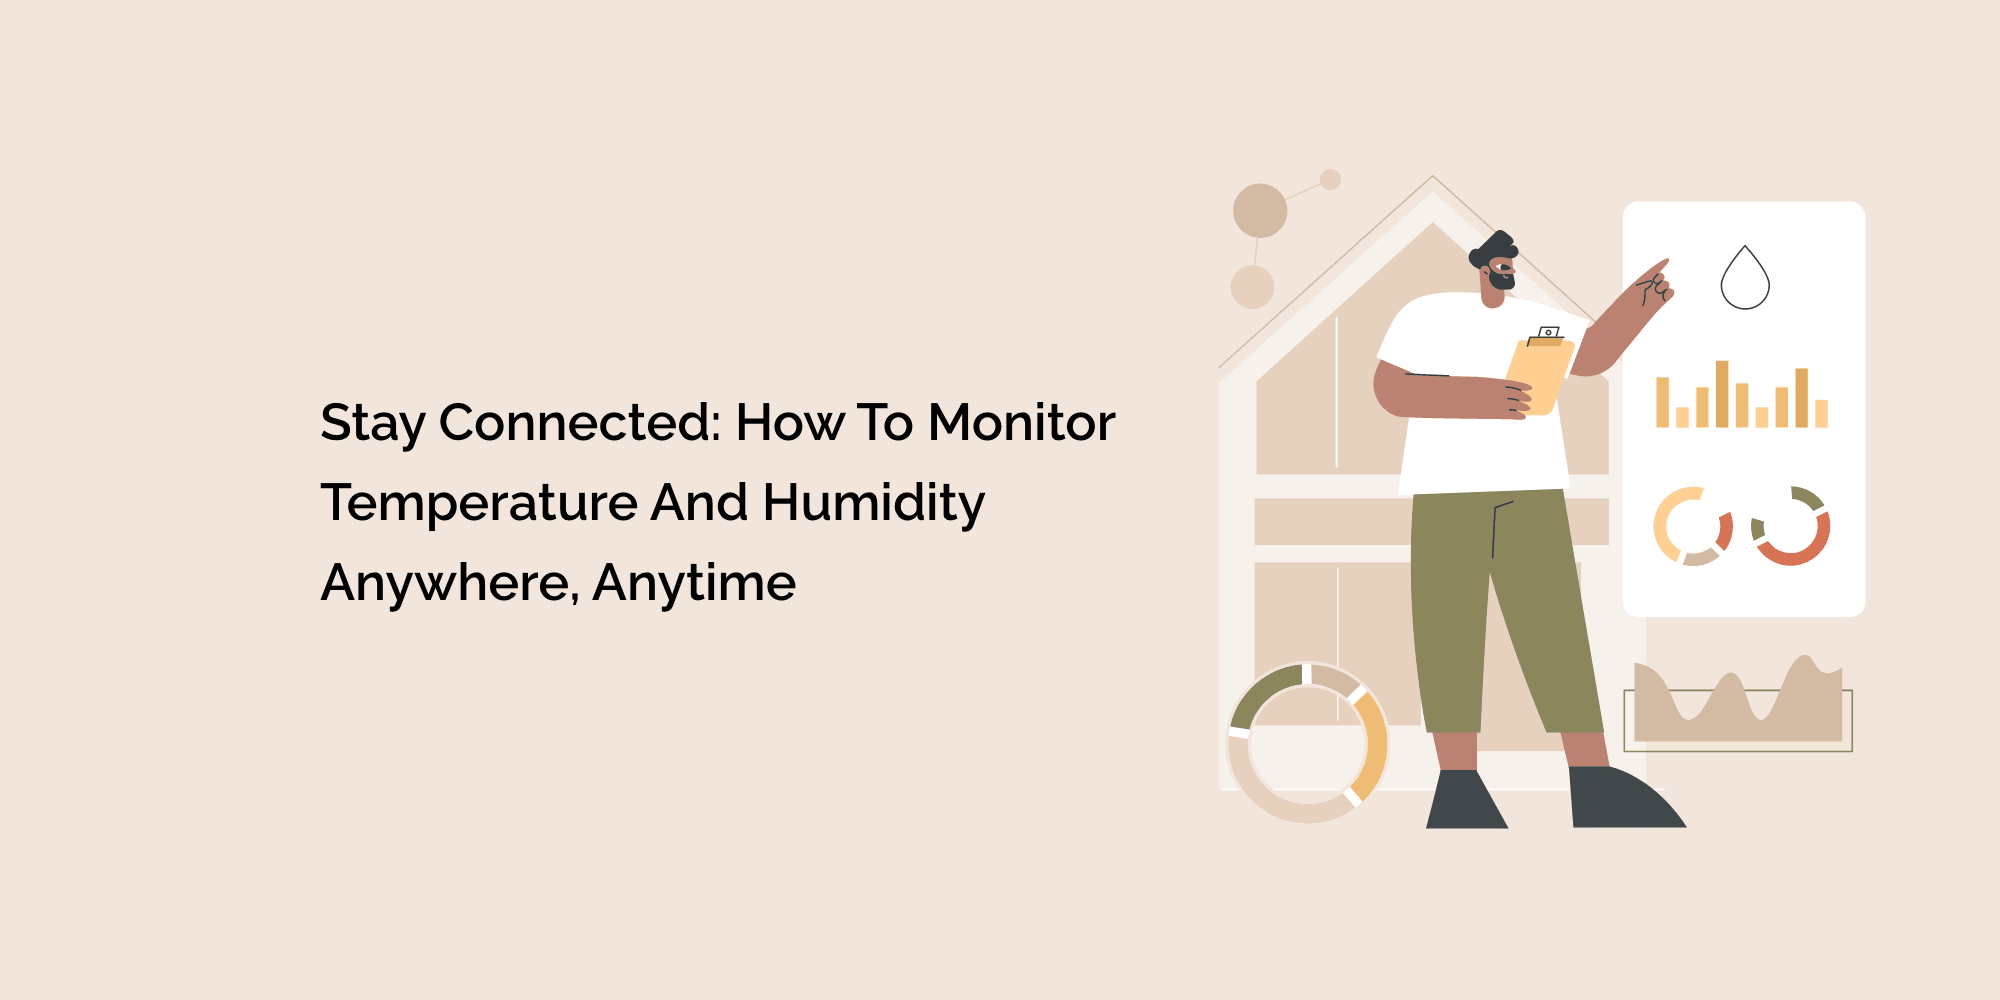 Stay Connected: How to Monitor Temperature and Humidity Anywhere, Anytime